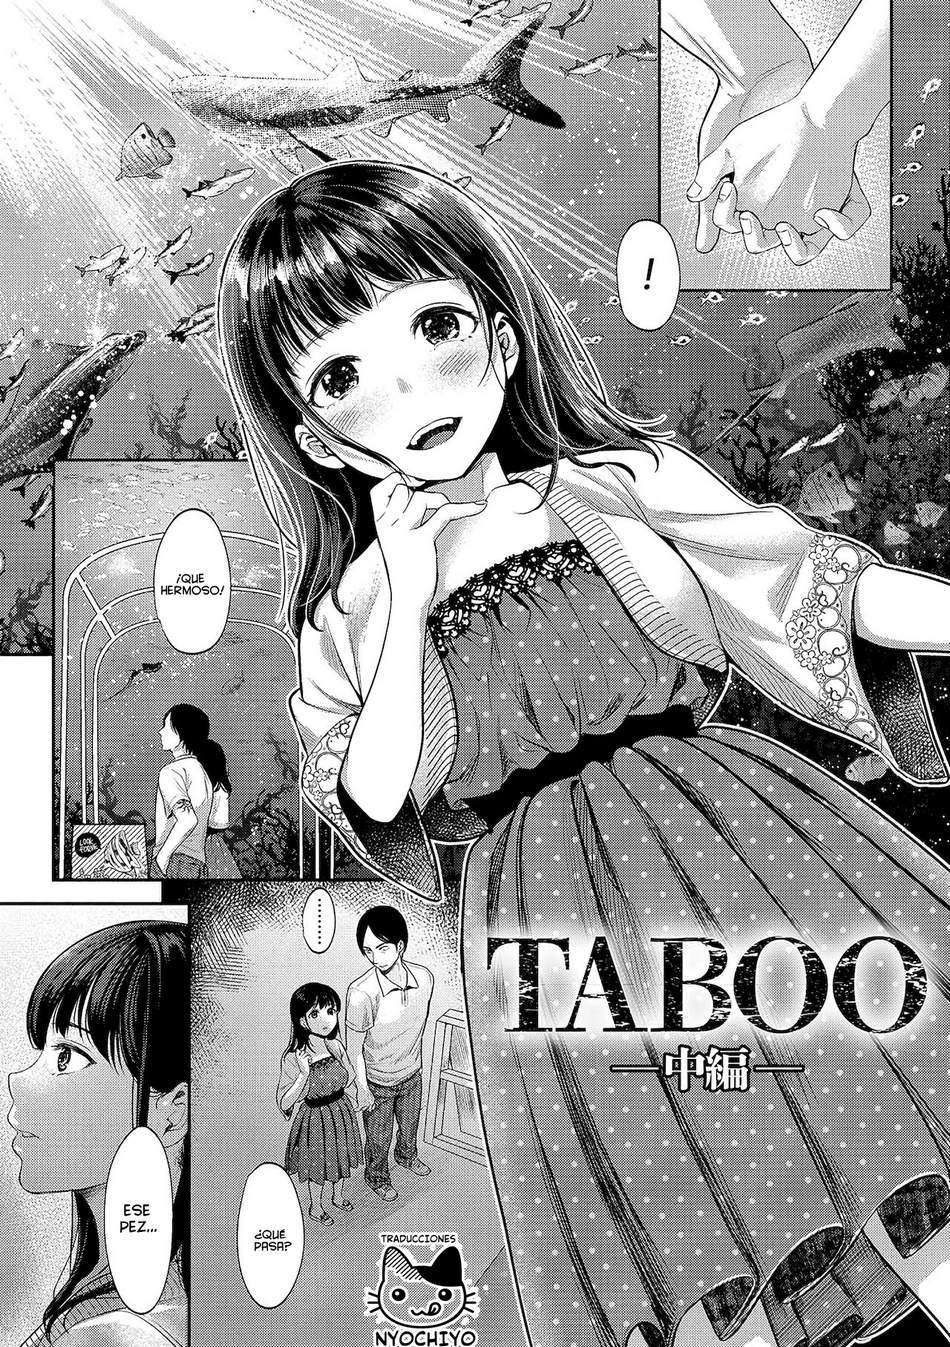 TABOO #2 - Page #1